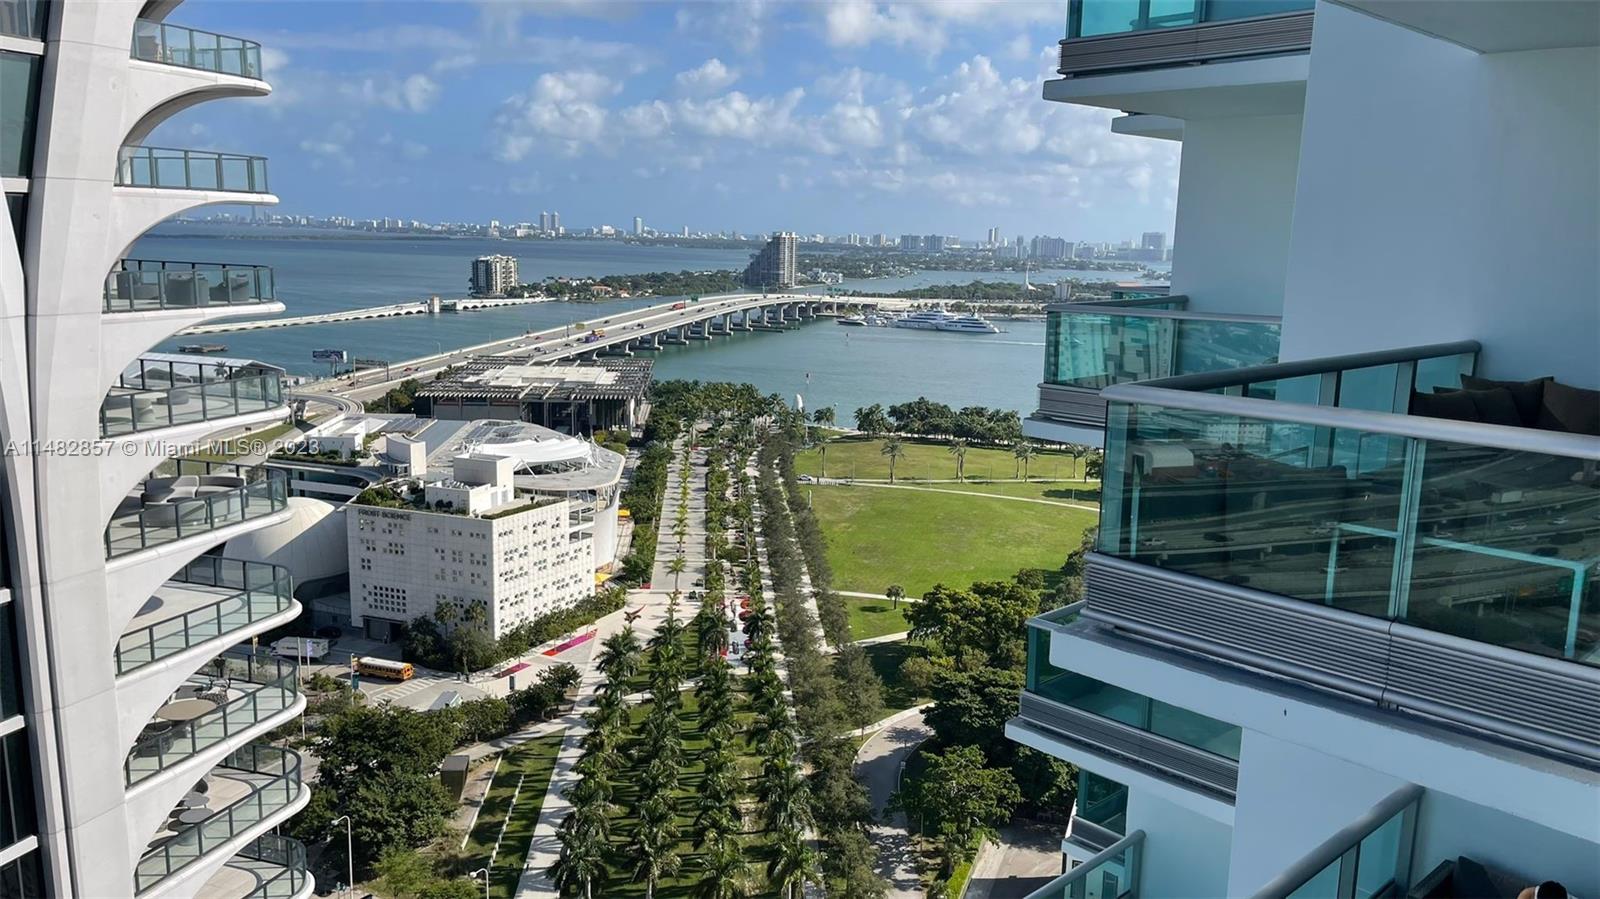 Beautiful high unit in 900 Biscayne Bay. Great Building with an excellent location, next to the Heat Stadium, shops, museums, restaurants with a varied gastronomic offer and just a few minutes from the beach. Surrounded by an atmosphere of art, culture and entertainment. Close to everything Miami has to offer... The Building has all the comforts you can ask: swimming pool, gym, spa, billiards, children's game area, cinema, etc. Unit with large balconies with an excellent view and light, open kitchen, large living room - dining room area, new bathrooms, and rooms with plenty of space. This property is ideal to relax and enjoy your day to day in middle of Downtown Miami...